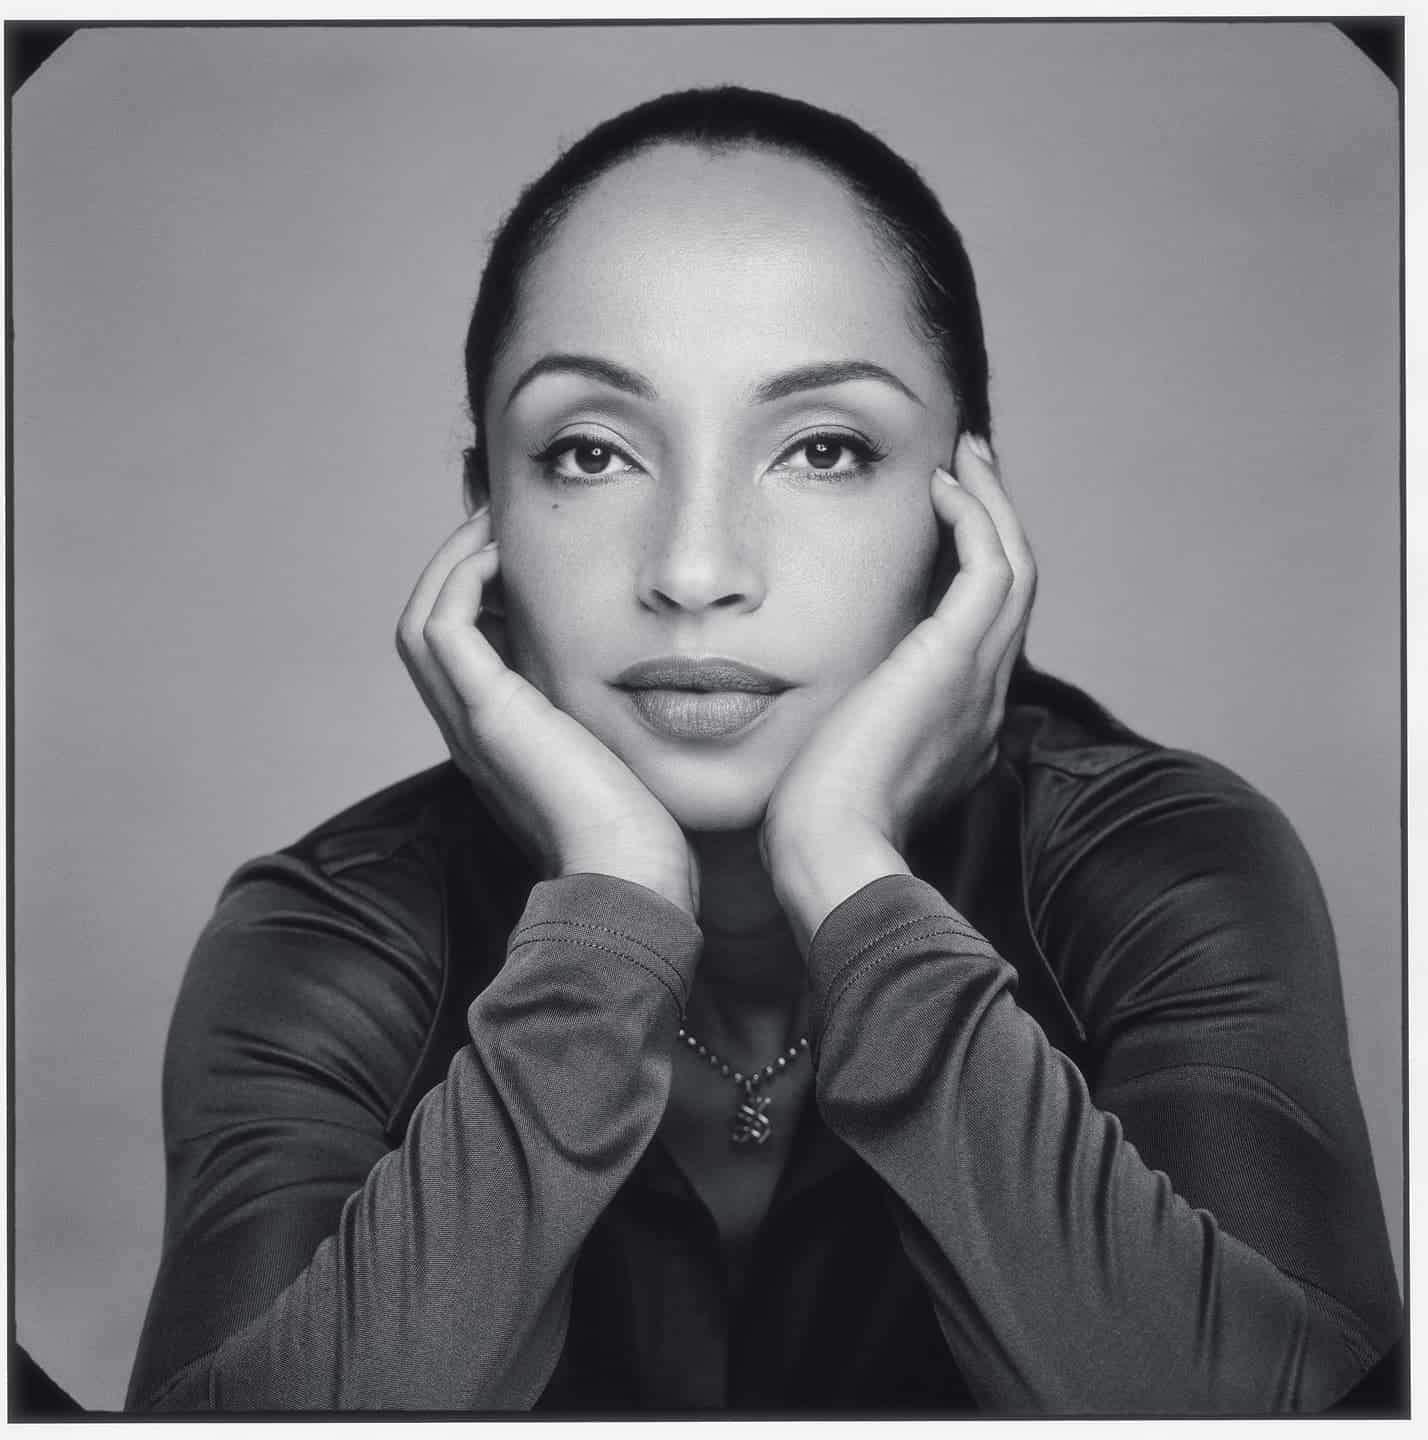 Sade Adu set to drop “Flower of The Universe”, her first release in 8 years.